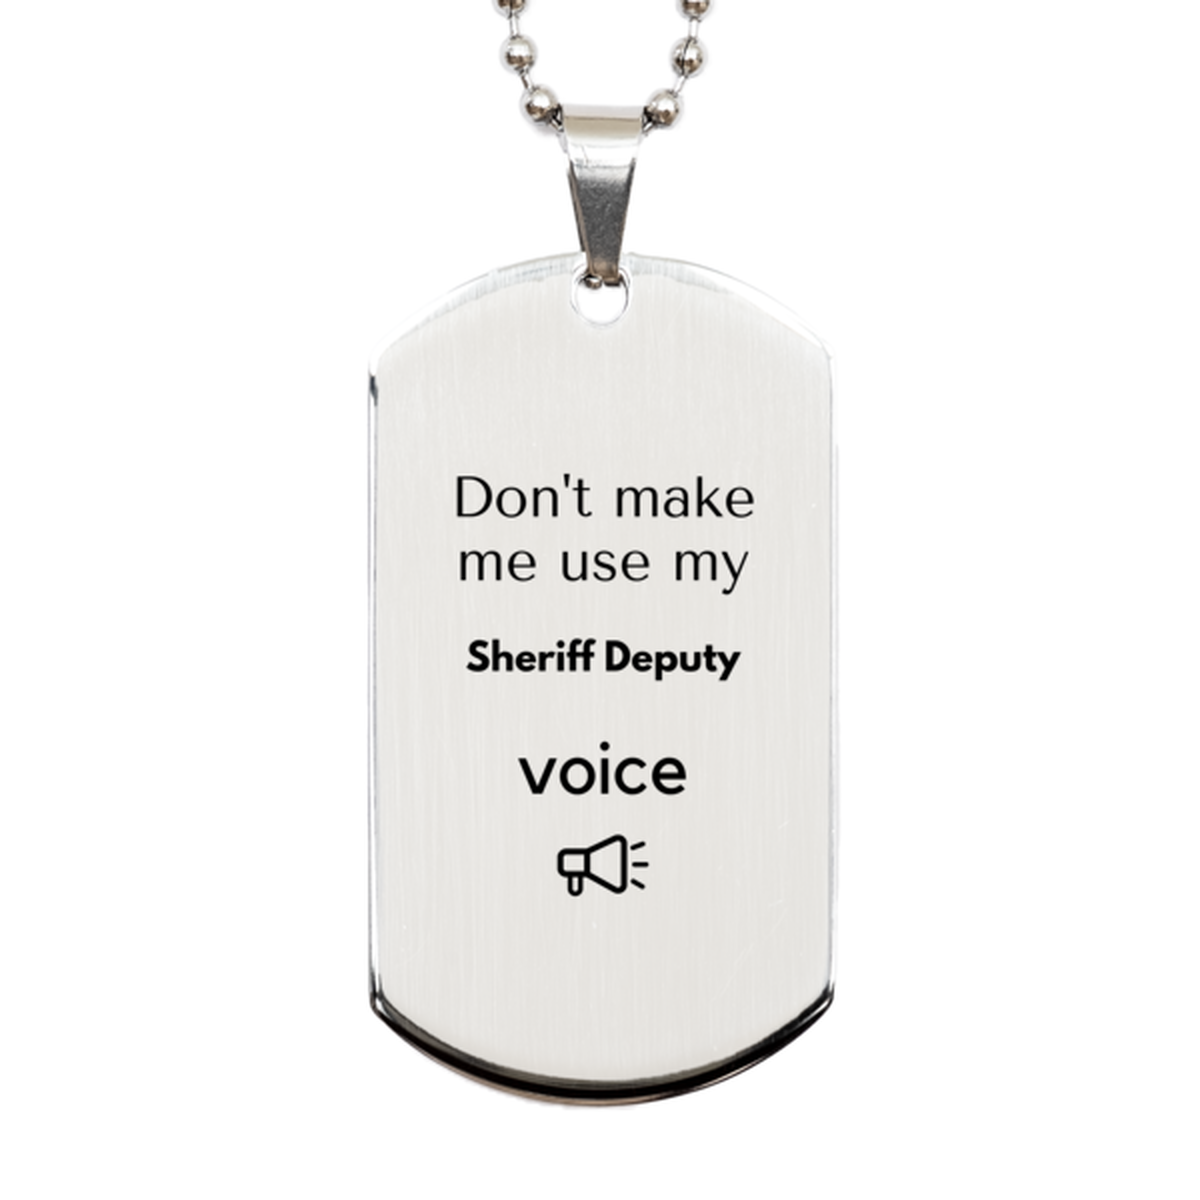 Don't make me use my Sheriff Deputy voice, Sarcasm Sheriff Deputy Gifts, Christmas Sheriff Deputy Silver Dog Tag Birthday Unique Gifts For Sheriff Deputy Coworkers, Men, Women, Colleague, Friends